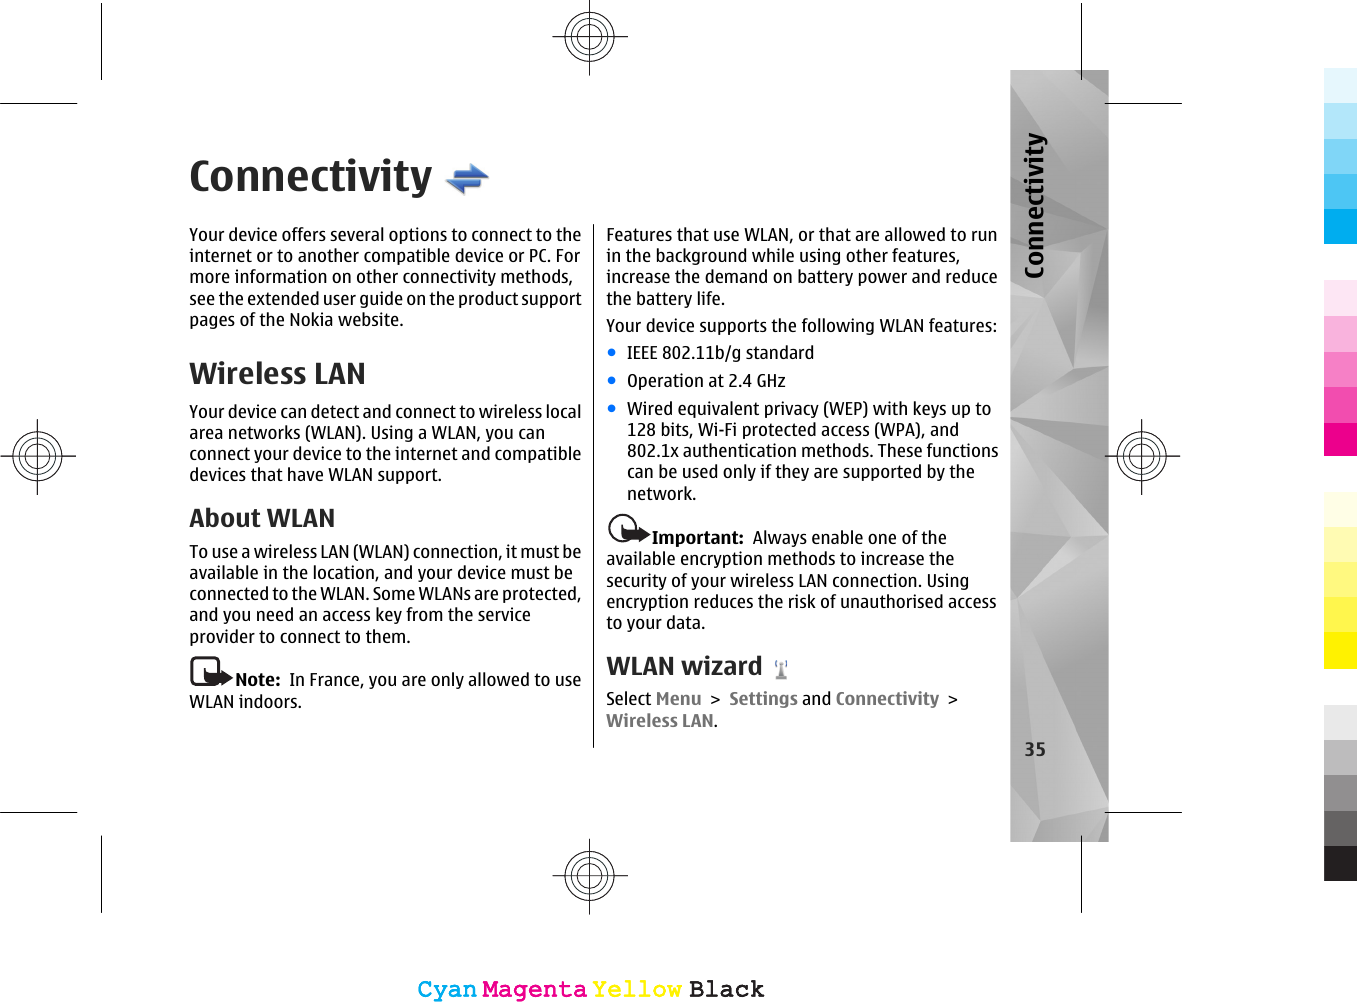 ConnectivityYour device offers several options to connect to theinternet or to another compatible device or PC. Formore information on other connectivity methods,see the extended user guide on the product supportpages of the Nokia website.Wireless LAN Your device can detect and connect to wireless localarea networks (WLAN). Using a WLAN, you canconnect your device to the internet and compatibledevices that have WLAN support.About WLANTo use a wireless LAN (WLAN) connection, it must beavailable in the location, and your device must beconnected to the WLAN. Some WLANs are protected,and you need an access key from the serviceprovider to connect to them.Note:  In France, you are only allowed to useWLAN indoors.Features that use WLAN, or that are allowed to runin the background while using other features,increase the demand on battery power and reducethe battery life.Your device supports the following WLAN features:●IEEE 802.11b/g standard●Operation at 2.4 GHz●Wired equivalent privacy (WEP) with keys up to128 bits, Wi-Fi protected access (WPA), and802.1x authentication methods. These functionscan be used only if they are supported by thenetwork.Important:  Always enable one of theavailable encryption methods to increase thesecurity of your wireless LAN connection. Usingencryption reduces the risk of unauthorised accessto your data.WLAN wizardSelect Menu &gt; Settings and Connectivity &gt;Wireless LAN.35ConnectivityCyanCyanMagentaMagentaYellowYellowBlackBlackCyanCyanMagentaMagentaYellowYellowBlackBlack